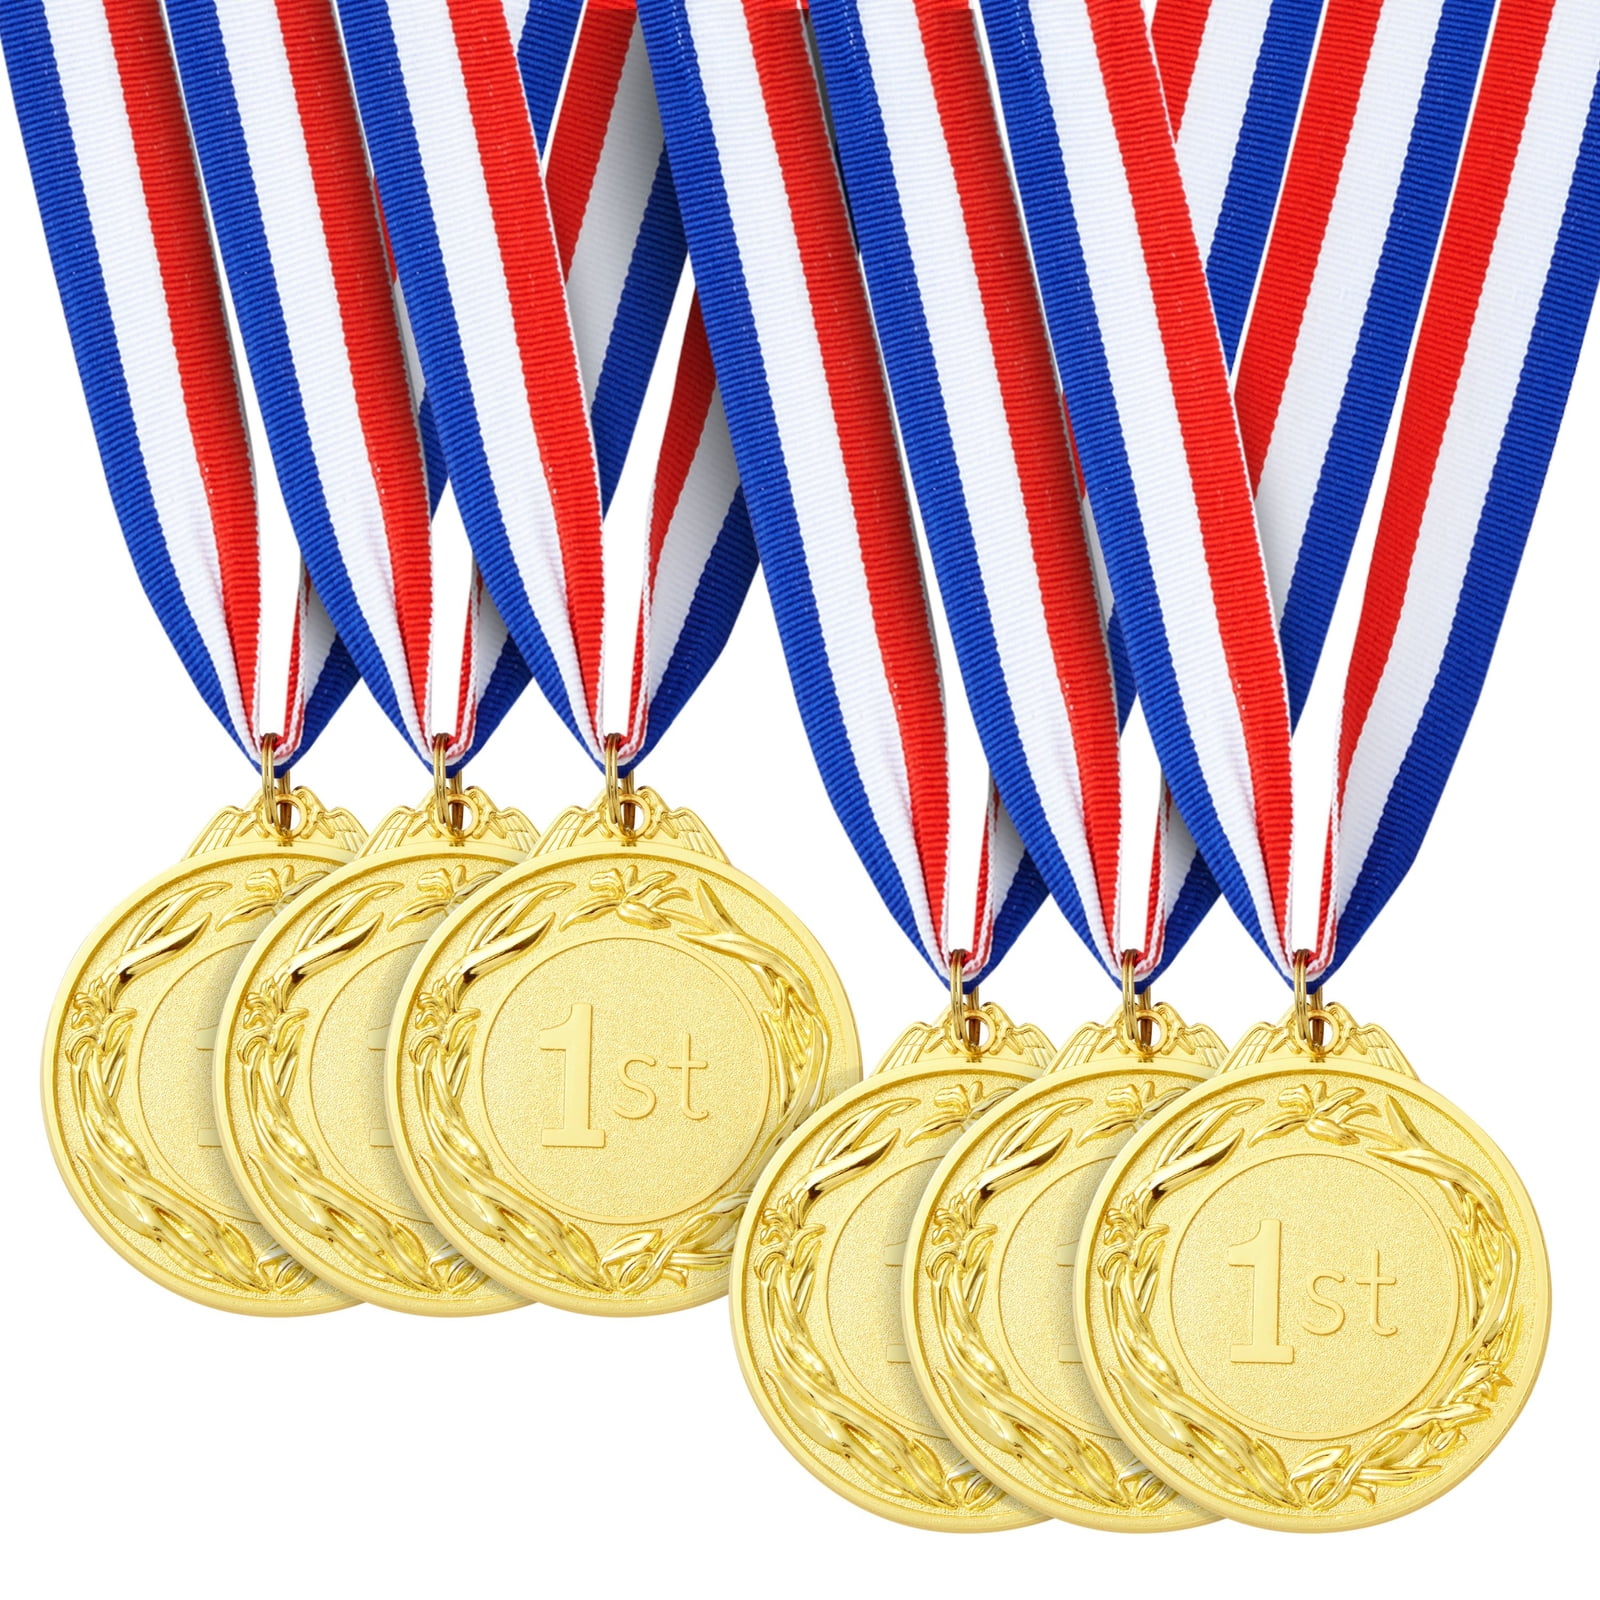 silver cup Volleyball medal with blue/white neck drape trophy award 